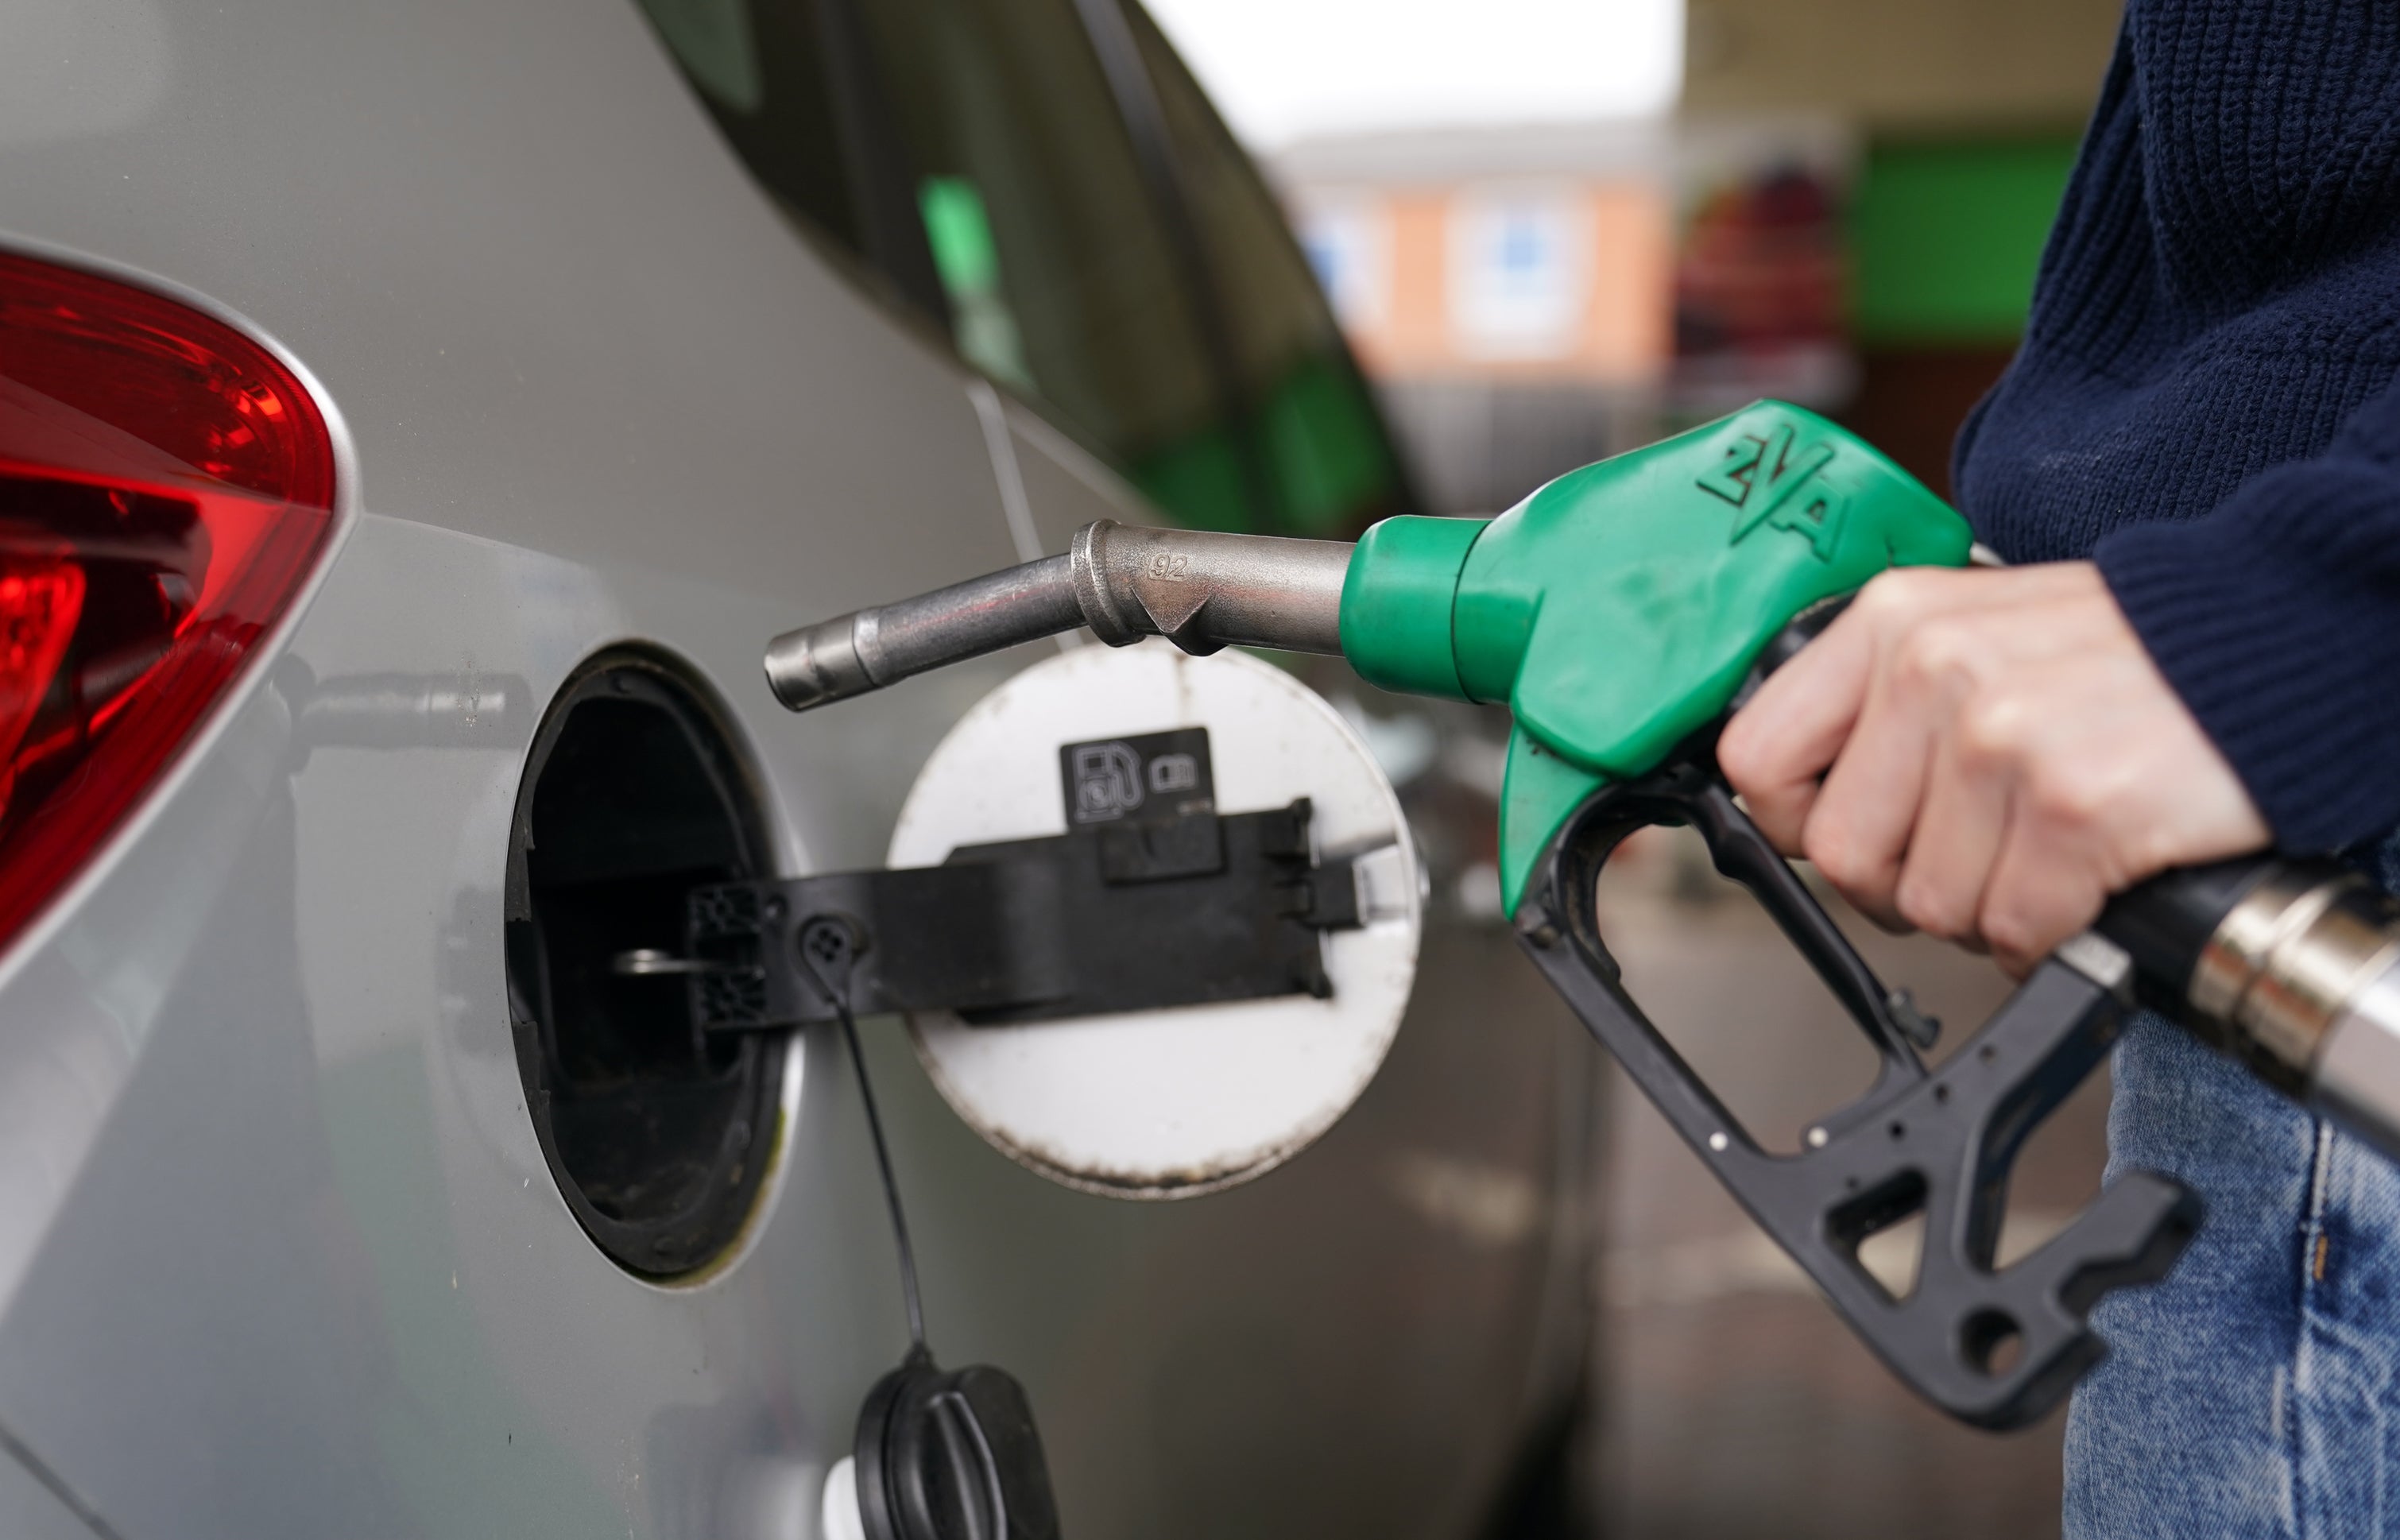 The average cost of a litre of diesel reached a new high of 167.4p on Wednesday, up from 165.2p on Tuesday